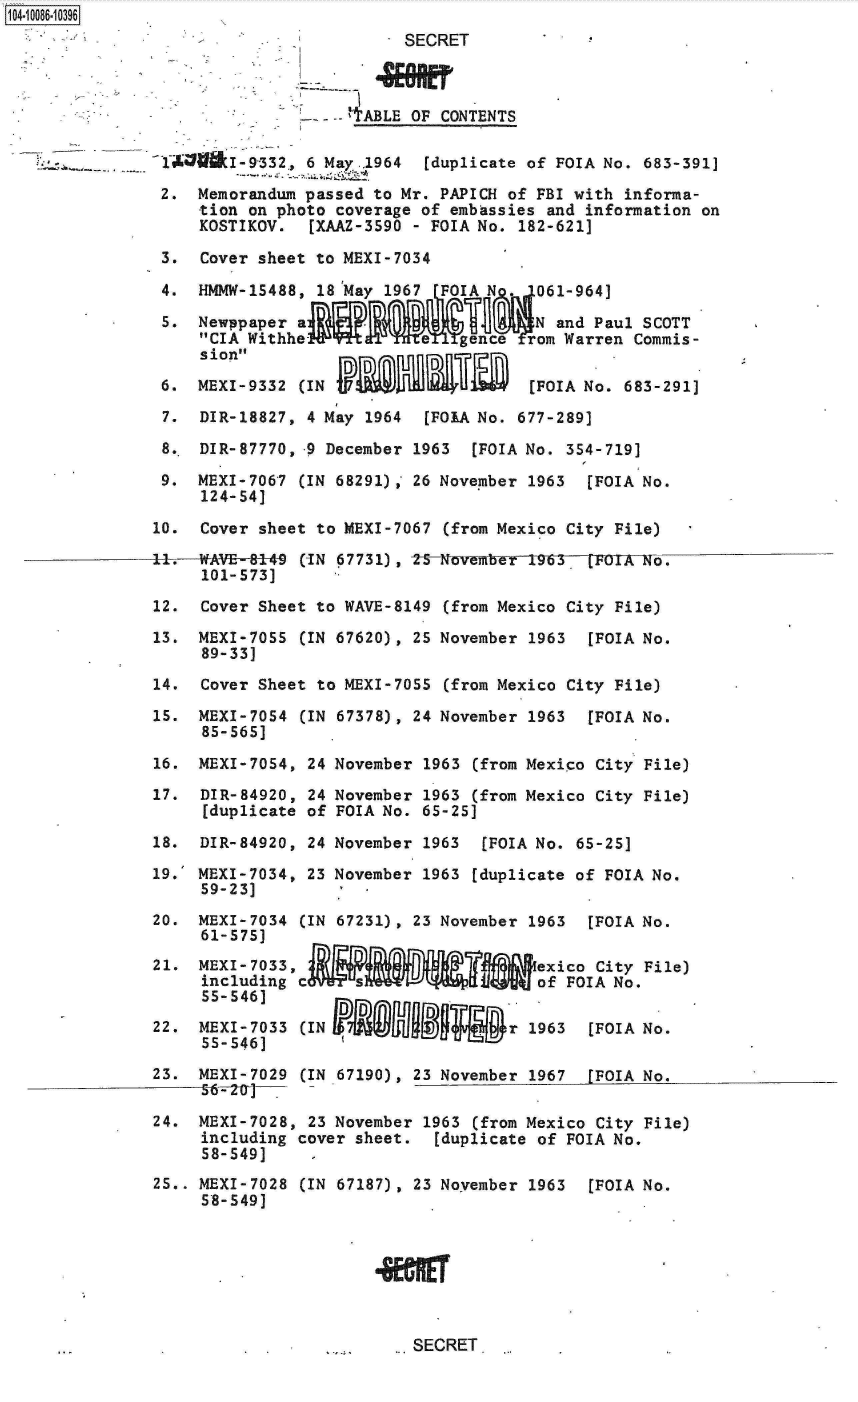 handle is hein.jfk/jfkarch09322 and id is 1 raw text is: 1O4~iOO86.1O396


                        - SECRET



                  -- ABLE OF CONTENTS

1AM    I-9332, 6 May.1964  [duplicate of FOIA No. 683-391]

2.  Memorandum passed to Mr. PAPICH of FBI with informa-
    tion on photo coverage of embassies and information on
    KOSTIKOV.  [XAAZ-3590 - FOIA No. 182-621]

3.  Cover sheet to MEXI-7034

4.  HMMW-15488, 18 'May 1967 FOIA N    061-964]

5.  Newppaper a                        N and Paul SCOTT
    CIA Withhe-           em  gence  rom Warren Commis-
    sion

6.  MEXI-9332 (IN                     [FOIA No. 683-291]

7.  DIR-18827, 4 May 1964   [FOIA No. 677-289]

8.. DIR-87770, 9 December 1963  [FOIA No. 354-719]

9.  MEXI-7067 (IN 68291); 26 November 1963   [FOIA No.
    124-54]


10.  Cover sheet to MEXI-7067 (from Mexico City File)

11.W WAT-014M (IN 67731), 25 Novemberlo   LIFuA No.
     101-573]

12.  Cover Sheet to WAVE-8149 (from Mexico City File)

13.  MEXI-7055 (IN 67620), 25 November 1963  [FOIA No.
     89-33]

14.  Cover Sheet to MEXI-7055 (from Mexico City File)

15.  MEXI-7054 (IN 67378), 24 November 1963  [FOIA No.
     85-565]

16.  MEXI-7054, 24 November 1963 (from Mexico City File)

17.  DIR-84920, 24 November 1963 (from Mexico City File)
     [duplicate of FOIA No. 65-25]
18.  DIR-84920, 24 November 1963  [FOIA No. 65-25]

19.  MEXI-7034, 23 November 1963 [duplicate of FOIA No.
     59-23]

20.  MEXI-7034 (IN 67231), 23 November 1963  [FOIA No.
     61-575]
21.  MEXI-7033,                         exico City File)
     including c     s a                of P0IA No.
     55-S46]
22.  MEXI-7033 (IN I7RPH        vg~r   1963  [FOIA No.
     55-546]

23.  MEXI-7029 (IN 67190), 23 November 1967  [FOIA No.

24.  MEXI-7028, 23 November 1963 (from Mexico City File)
     including cover sheet.  [duplicate of FOIA No.
     58-549]     -
25.. MEXI-7028 (IN 67187), 23 November 1963  [FOIA No.
     58-549]


..SECRET


RW


